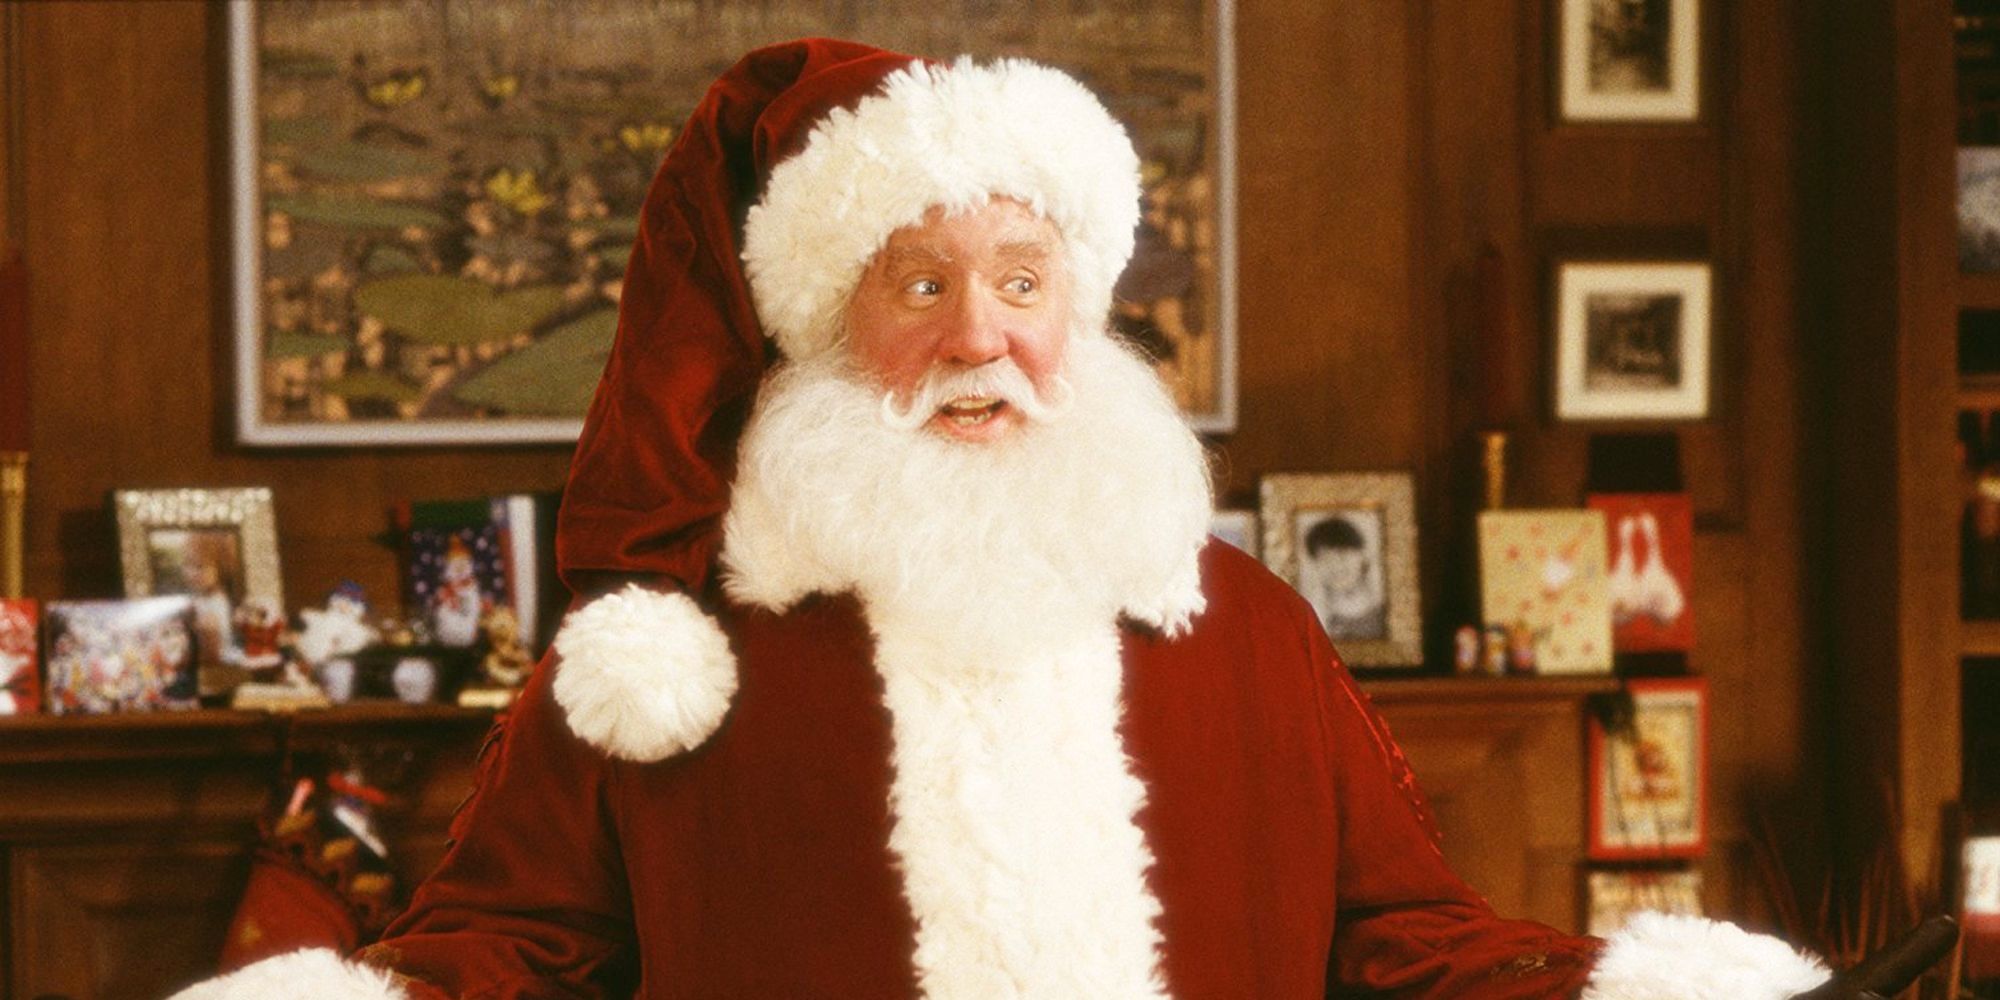 10 Things You Probably Didnt Know About The Santa Clause Trilogy